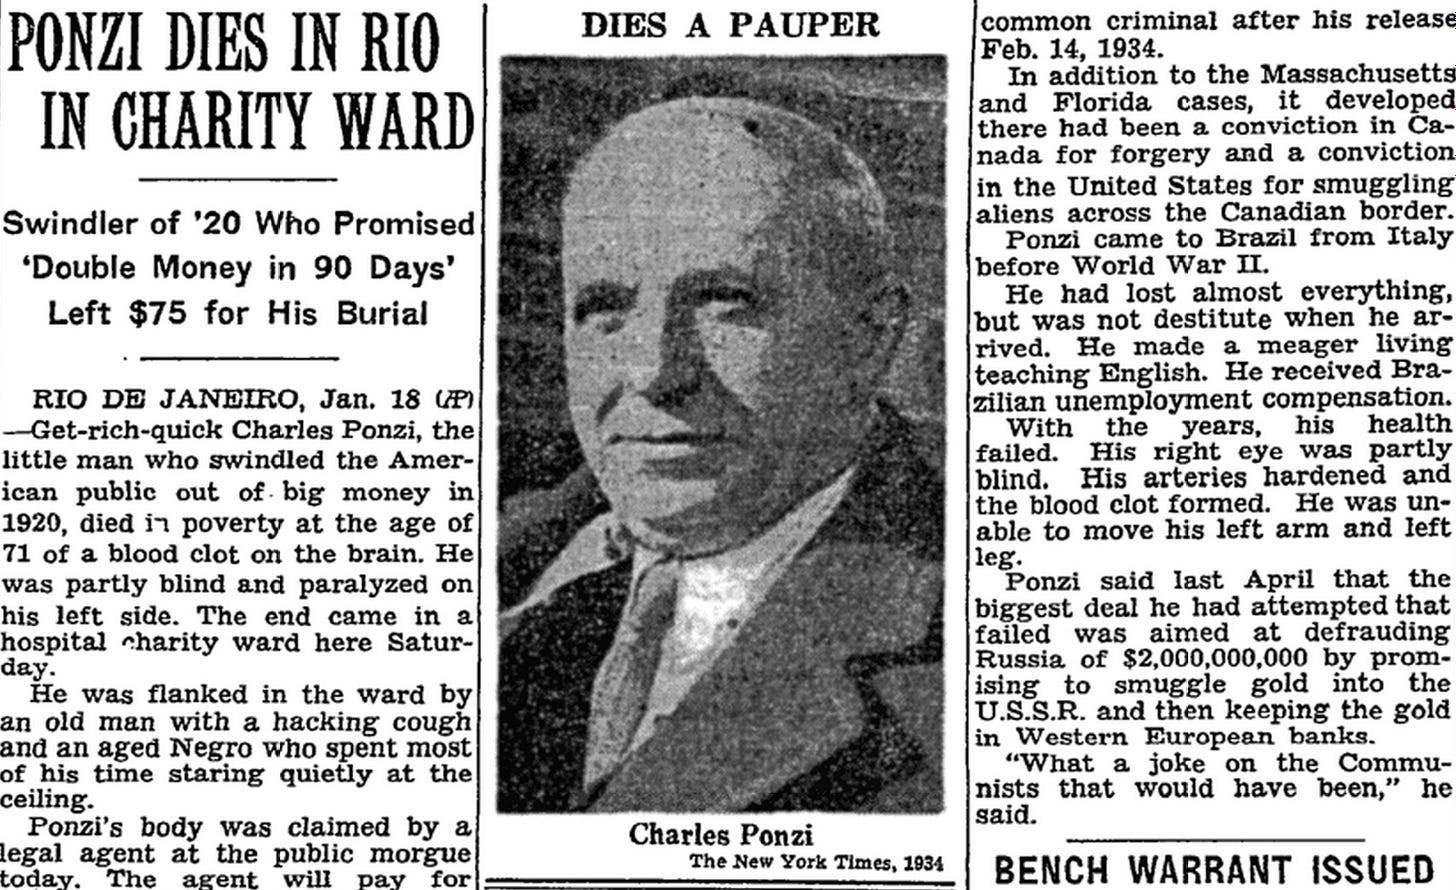 The New York Times Archives on X: "A destitute Charles Ponzi died in Brazil  66 years ago today. http://t.co/hOTorY6zuz http://t.co/lsDHzJqghz" / X